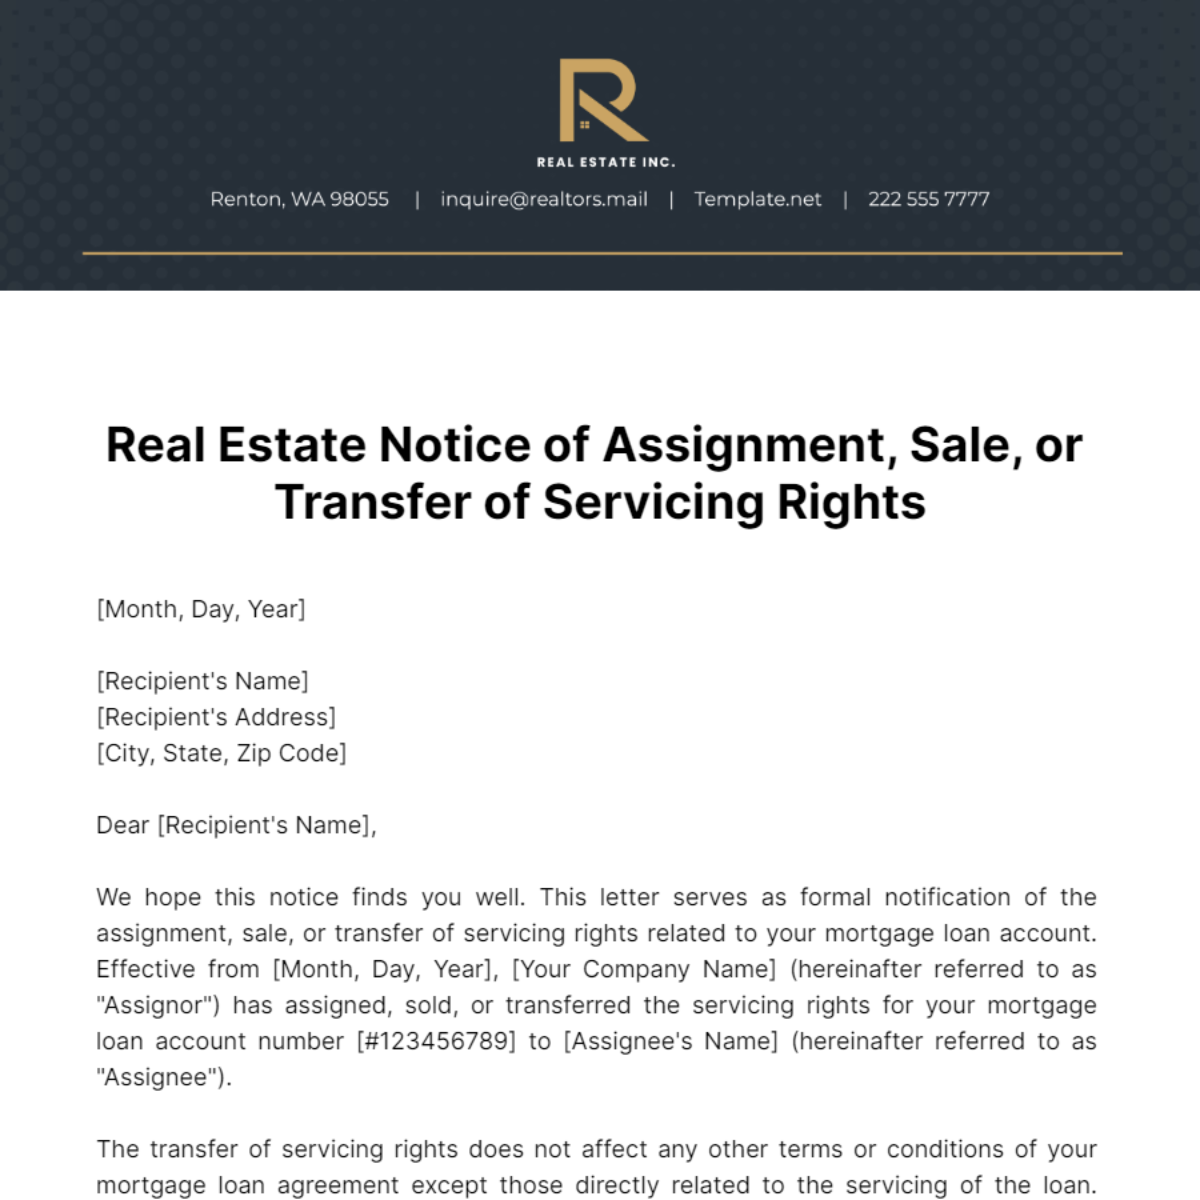 Real Estate Notice of Assignment, Sale, or Transfer of Servicing Rights Template